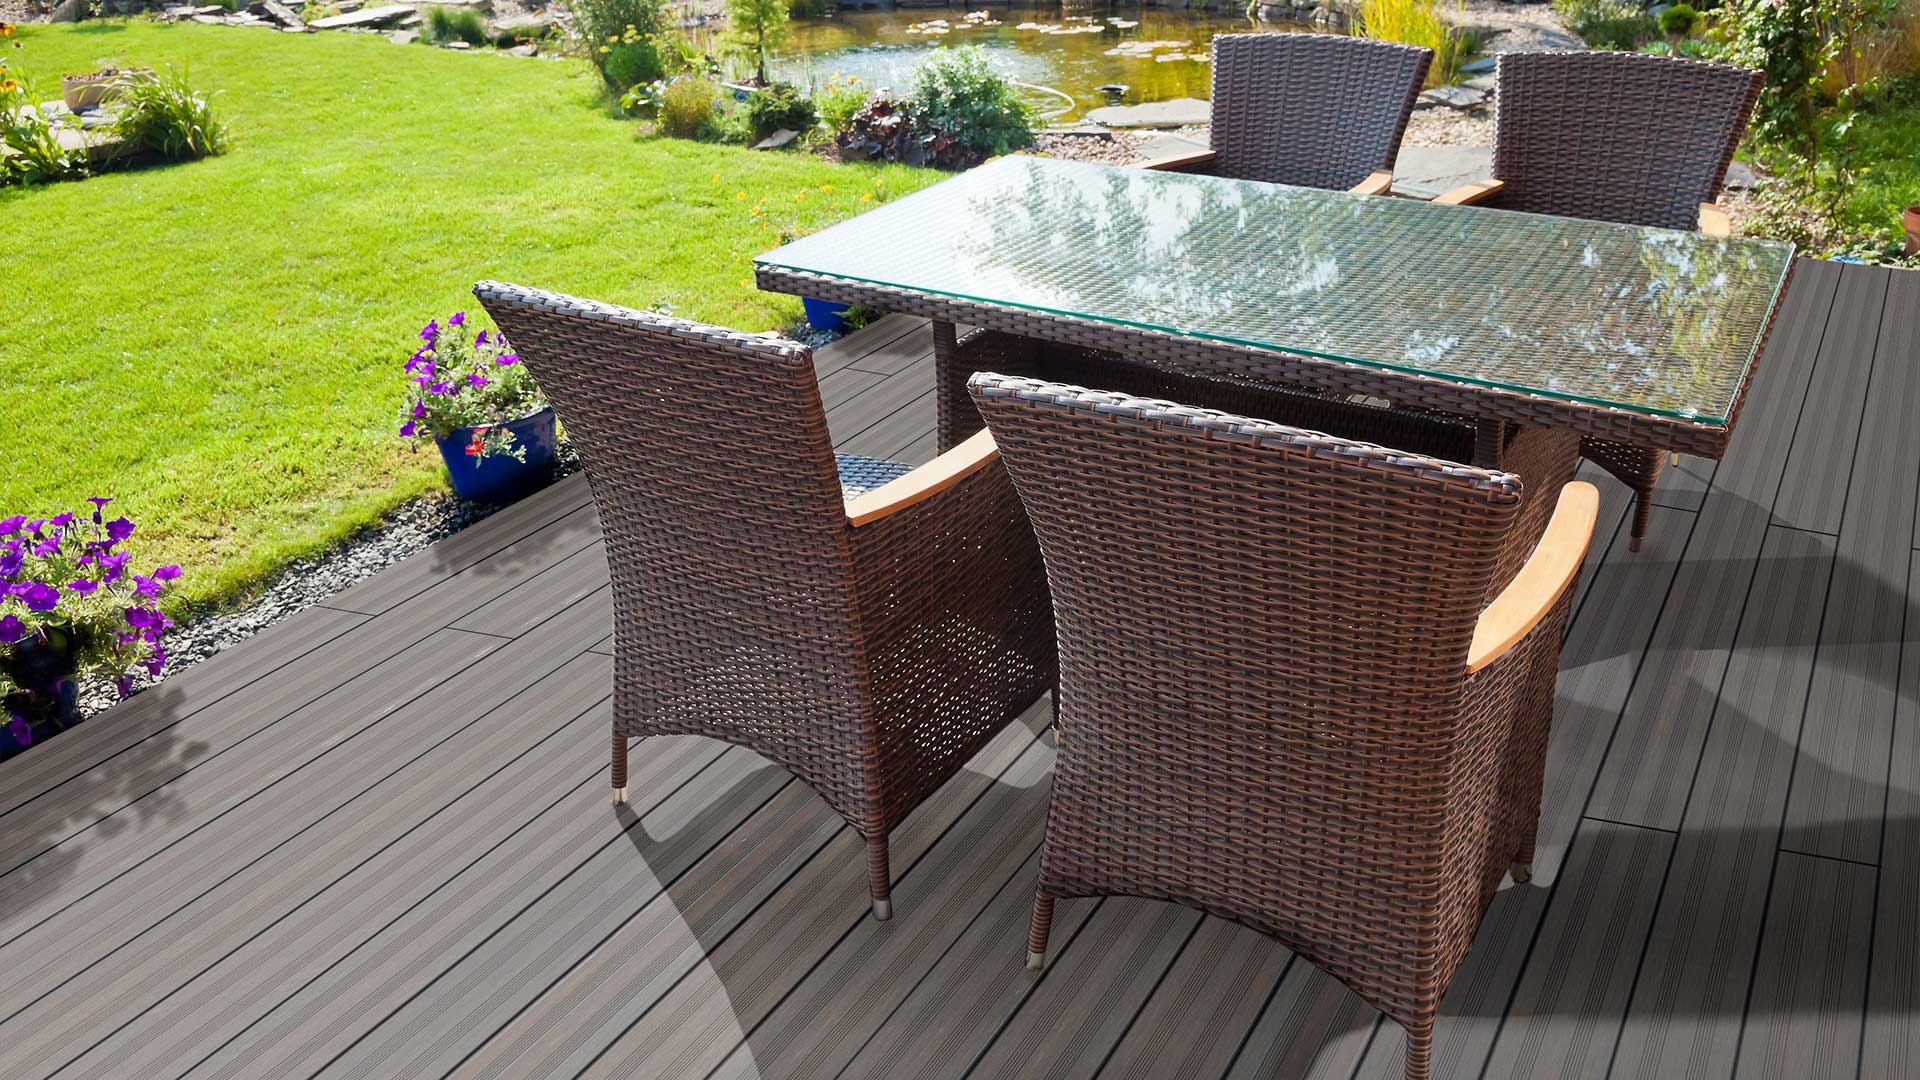 Terrace decking dining table